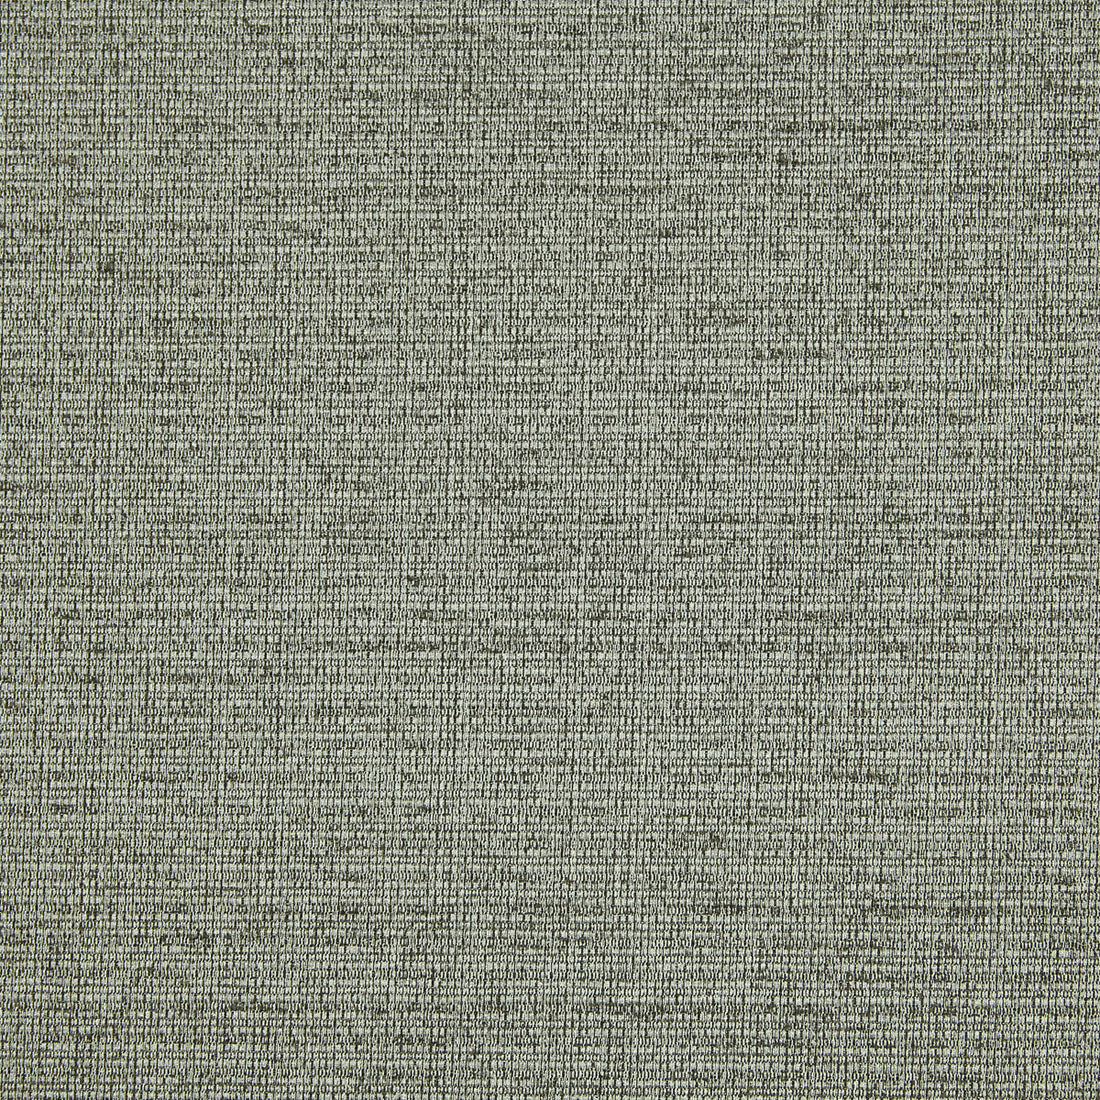 Shelley fabric in 3 color - pattern LZ-30365.03.0 - by Kravet Design in the Lizzo collection